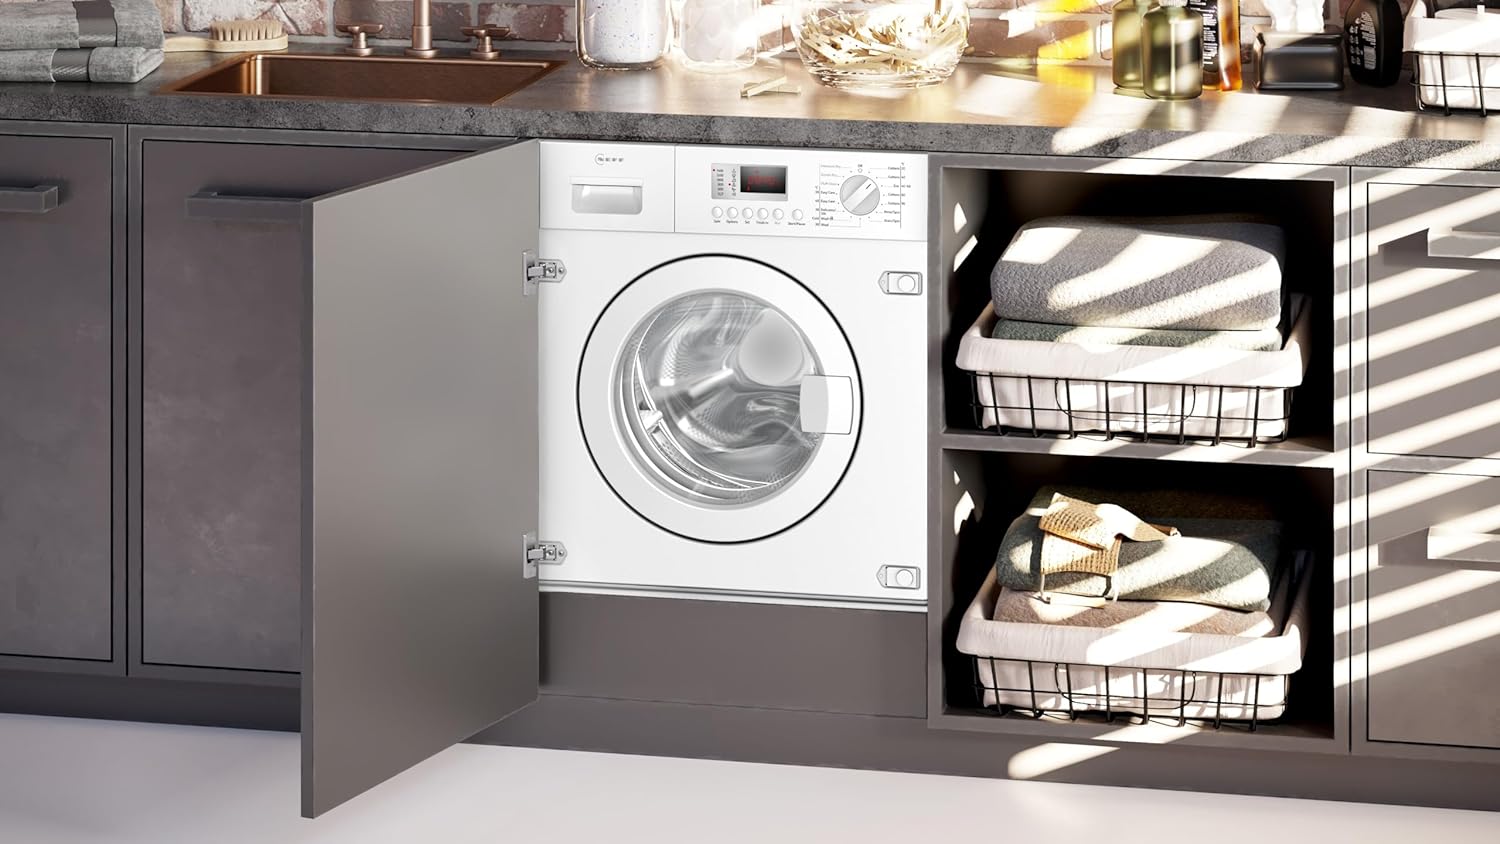 Neff V6320X2GB Built in Washer Dryer, 7kg wash / 4kg dry capacity, 1400rpm, Time delat/Time remaining, LED Display, White - Amazing Gadgets Outlet